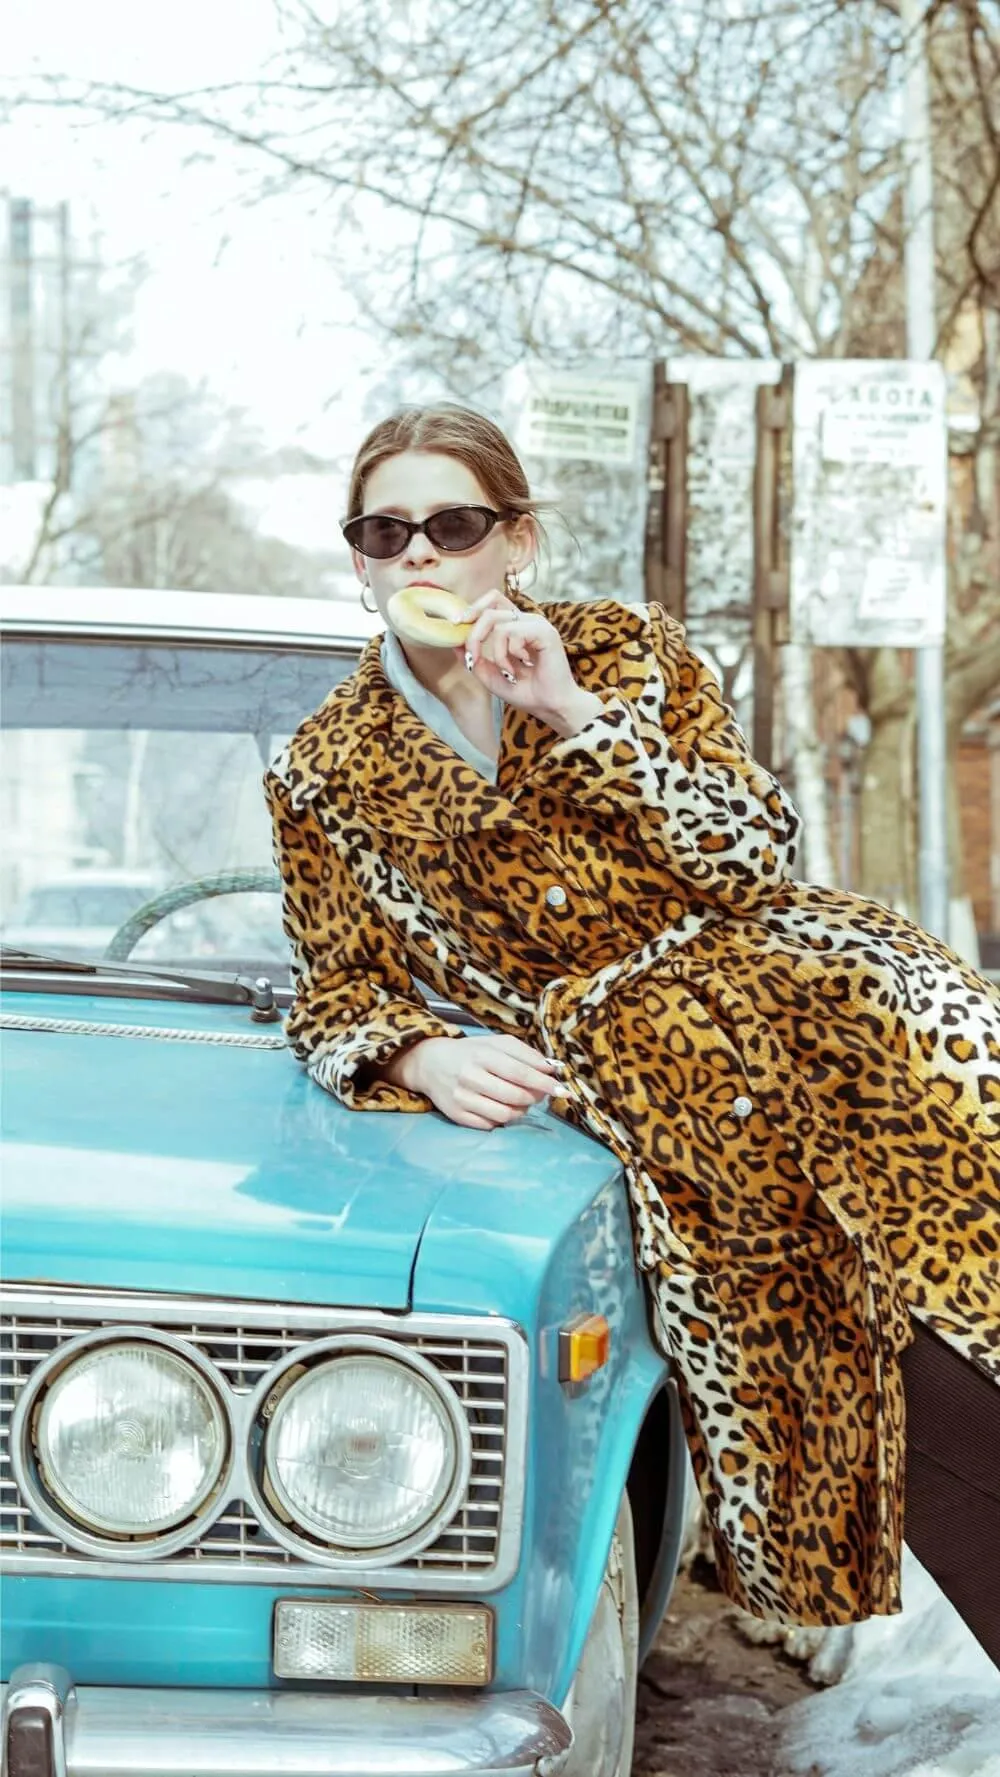 Woman in a leopard print coat leaning on an aqua old vehicle eating a bagel